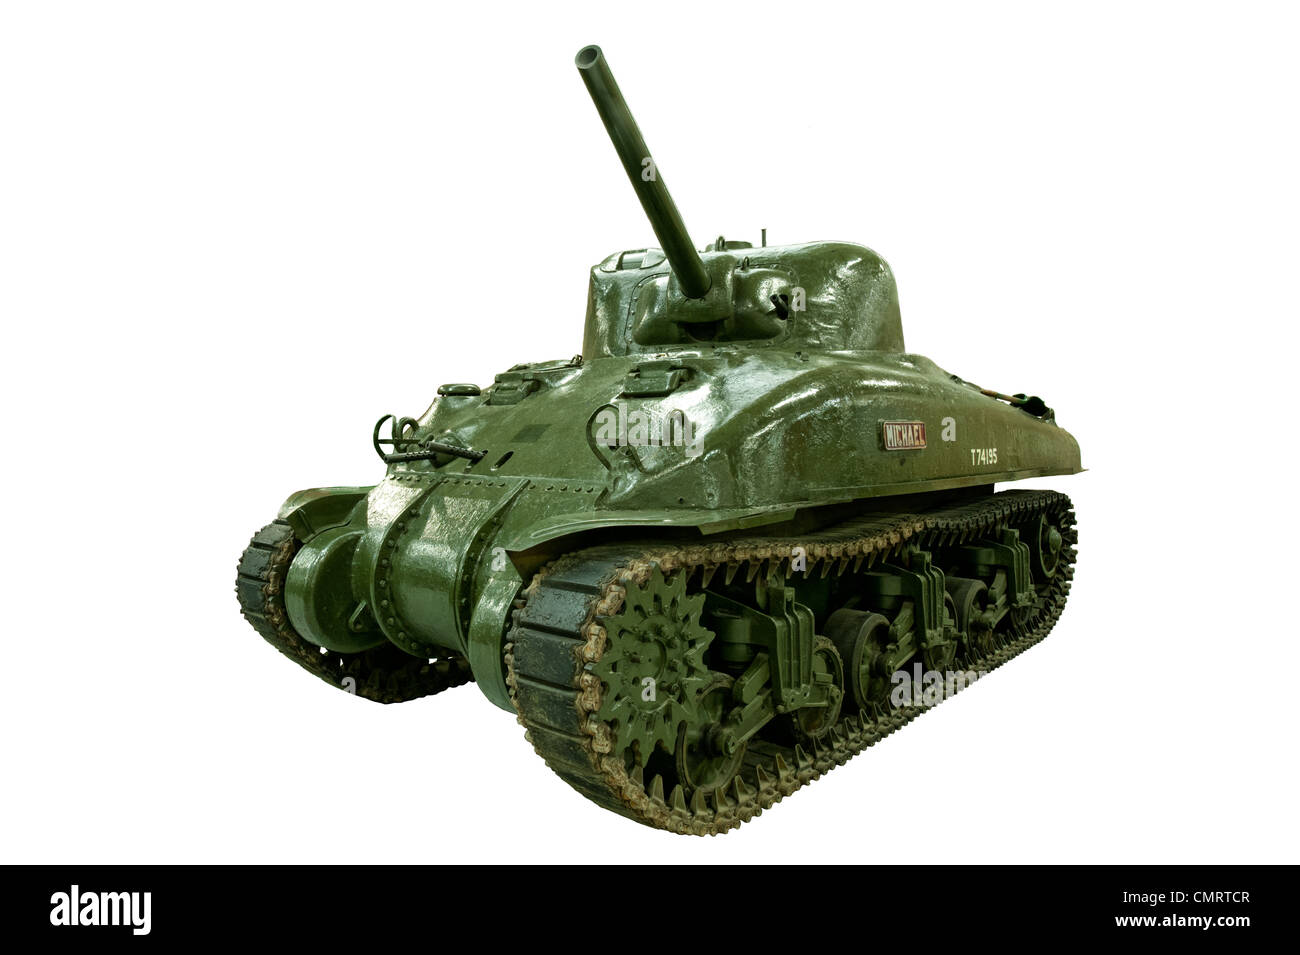 A cut out of an American M4A1 Sherman II Medium Tank used by US & allied forces during WW2 Stock Photo